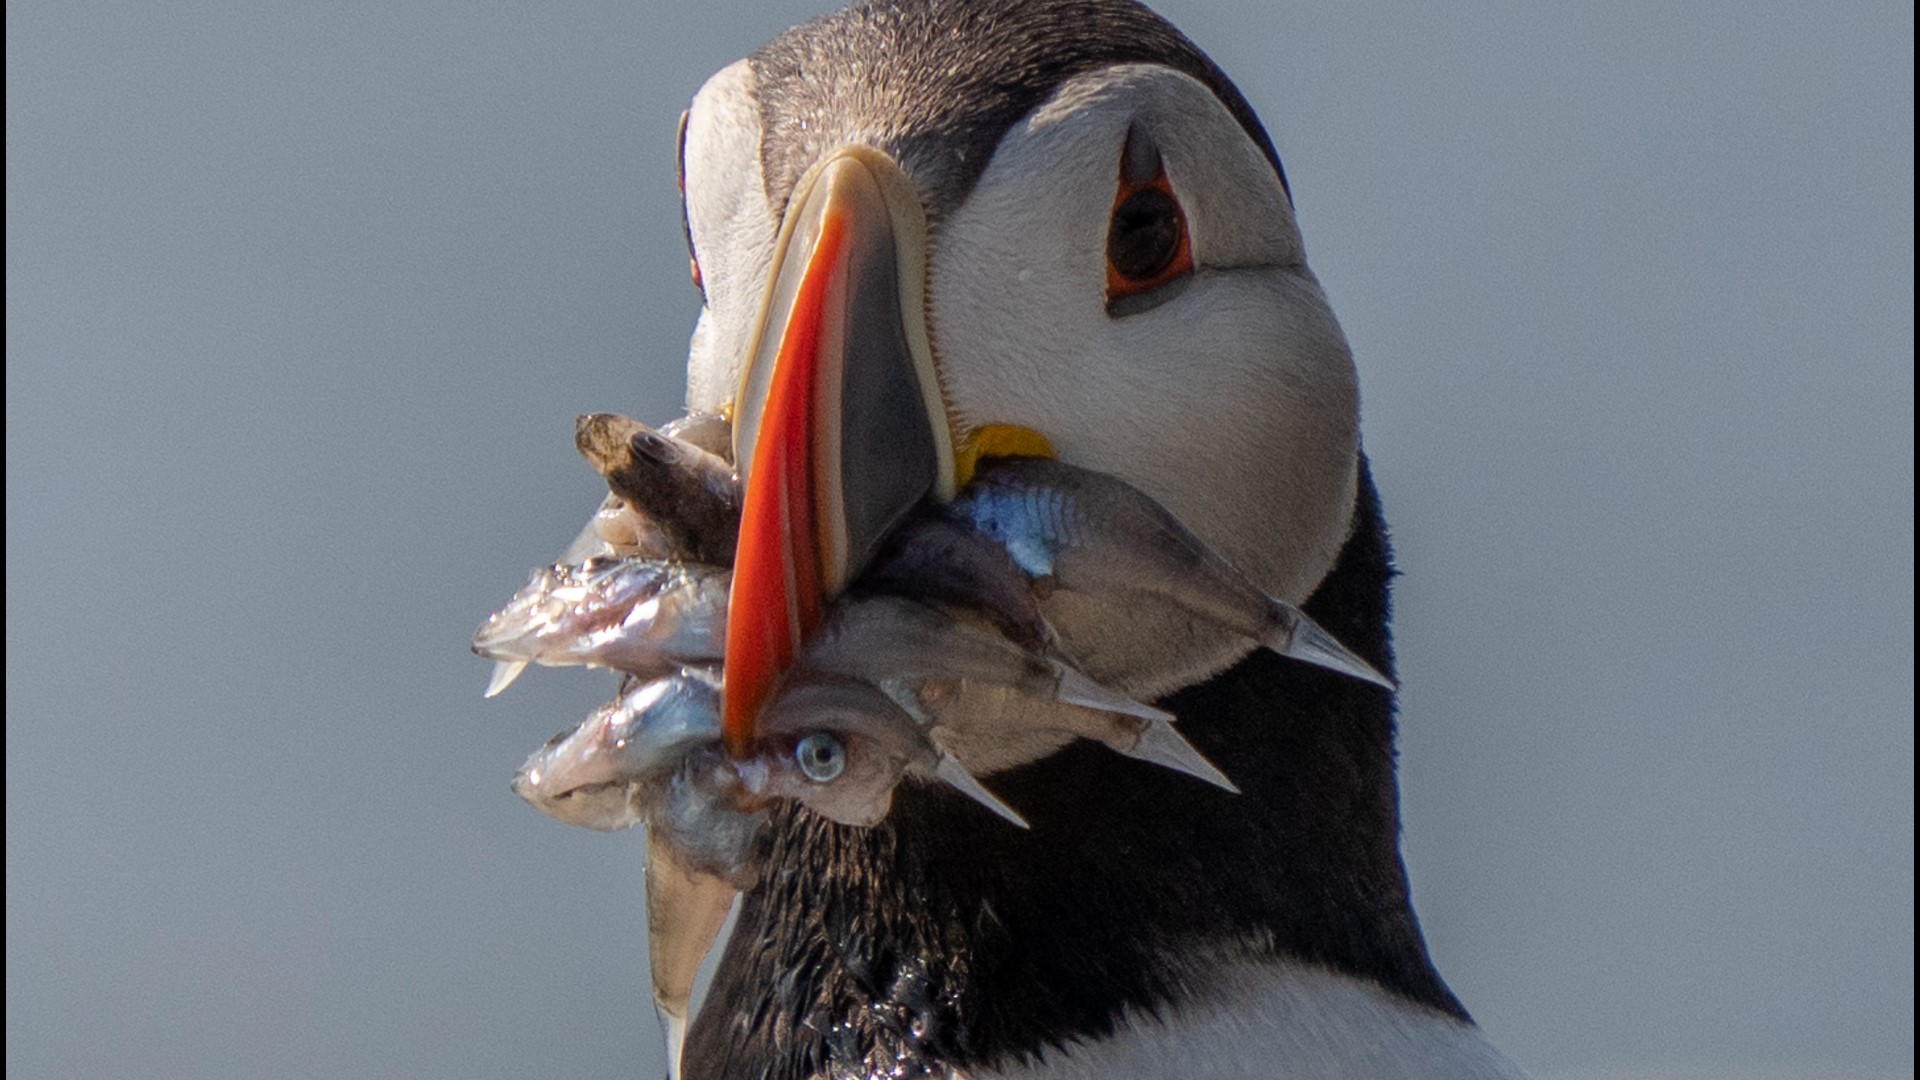 An Atlantic puffin brings a beak full of baitfish to feed its chick in a burrow under rocks on Eastern Egg Rock, a small island off mid-coast Maine, Sunday, Aug. 5,